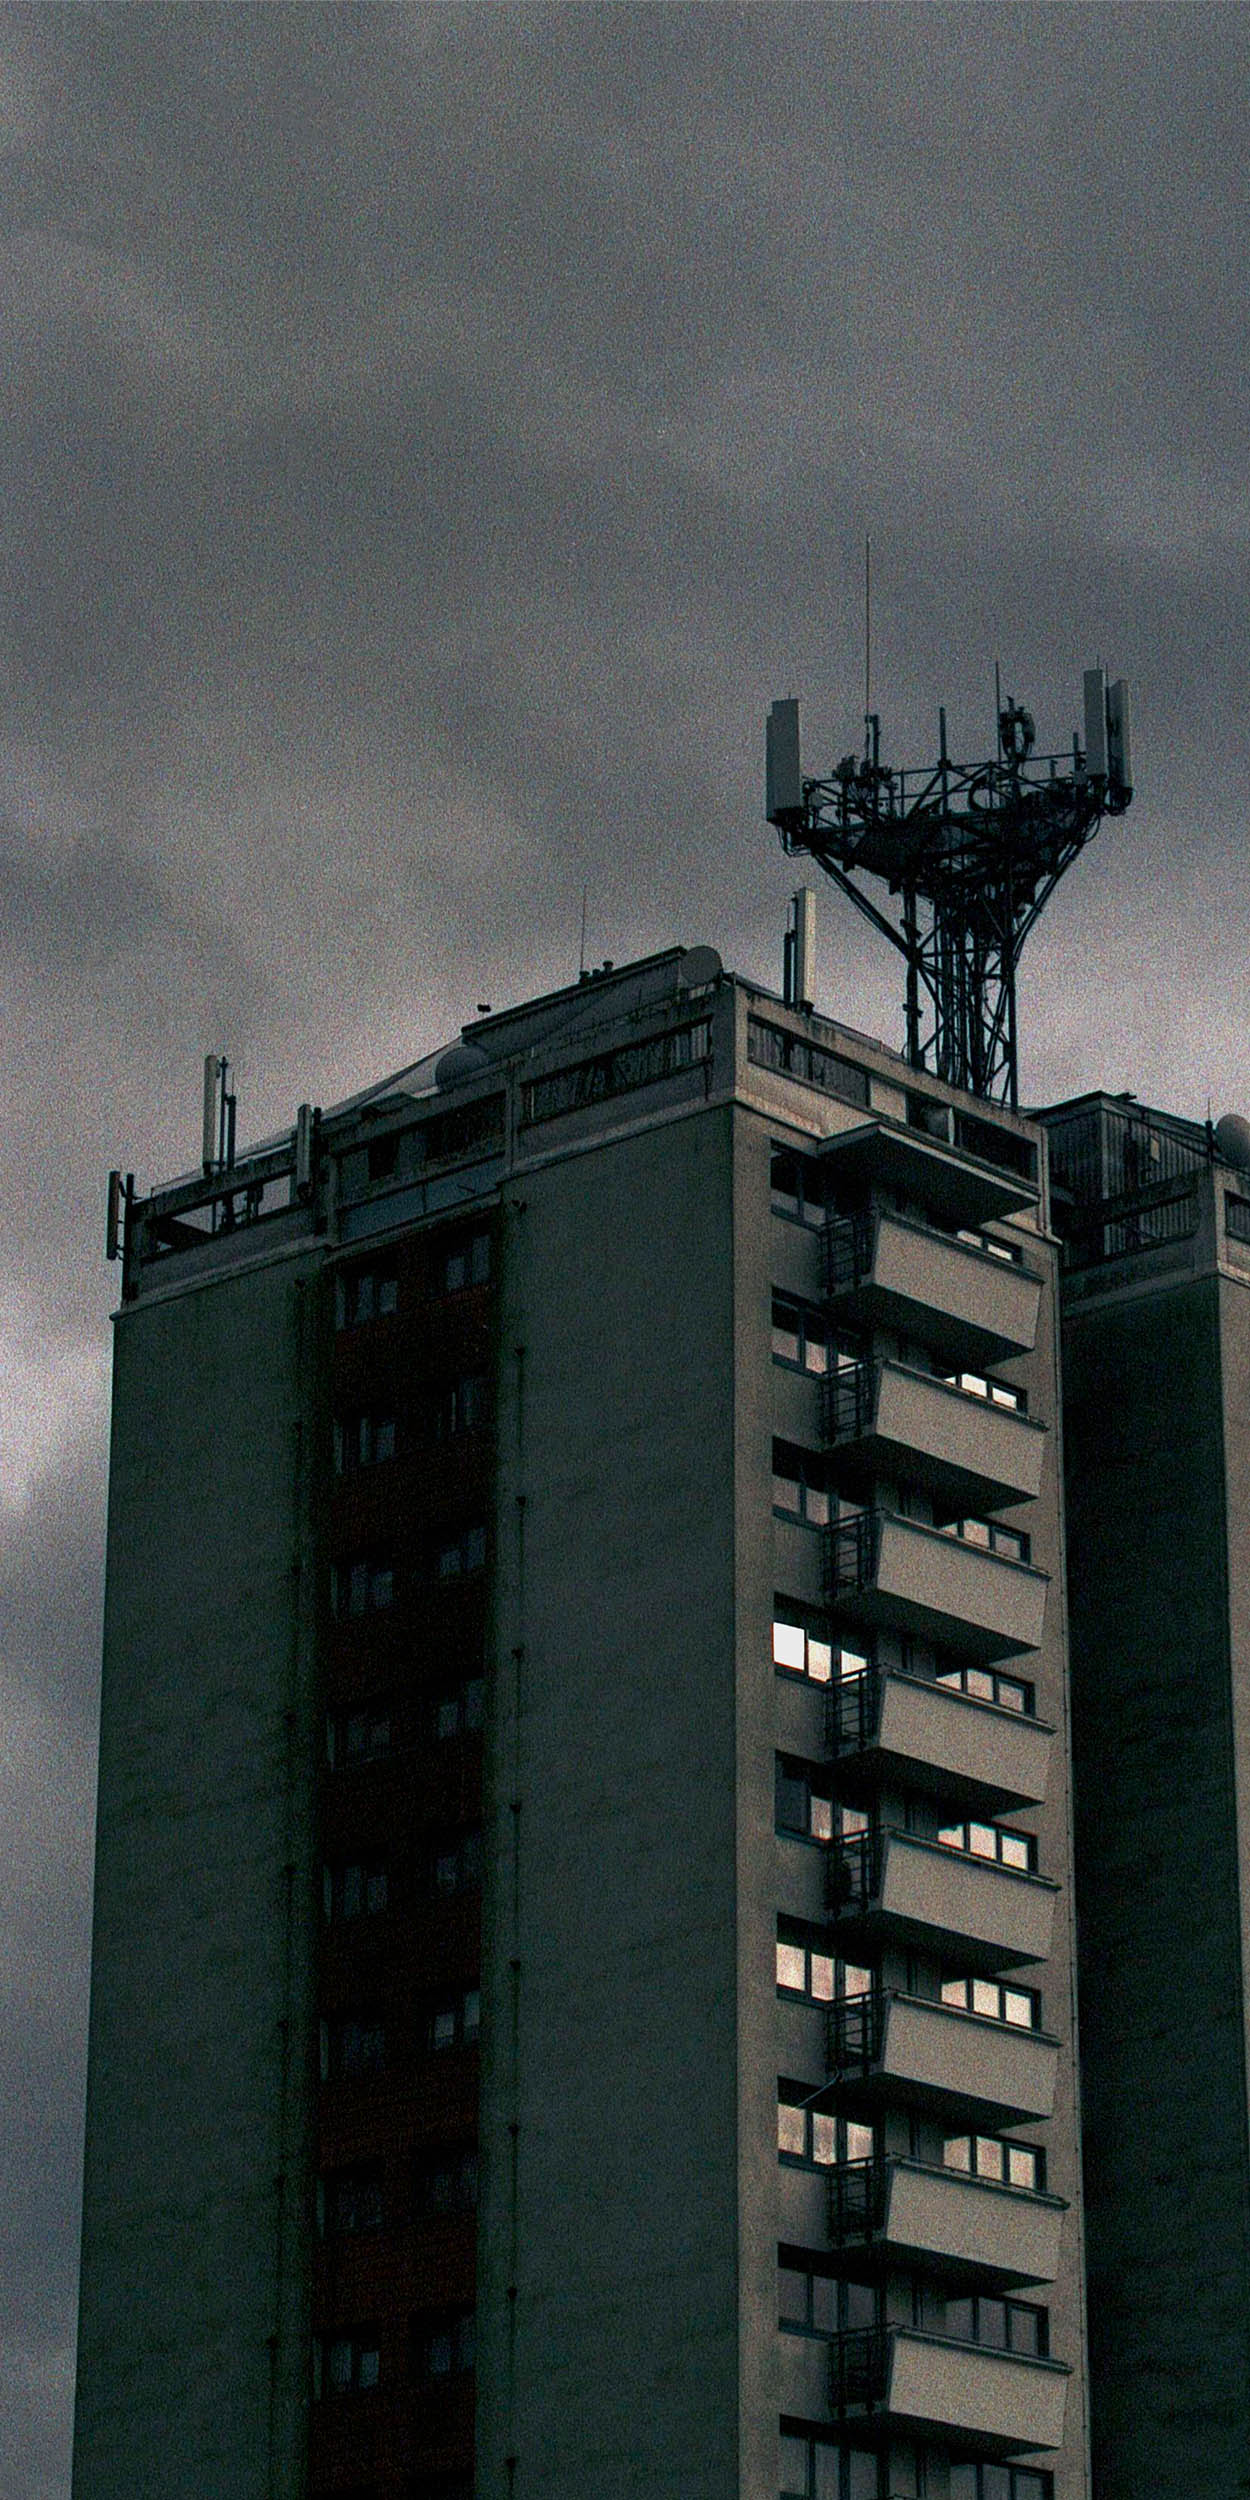 Ba Fine Art work by Brandon Tilley showing a clouded scene, with a dim lit set of tower block flats